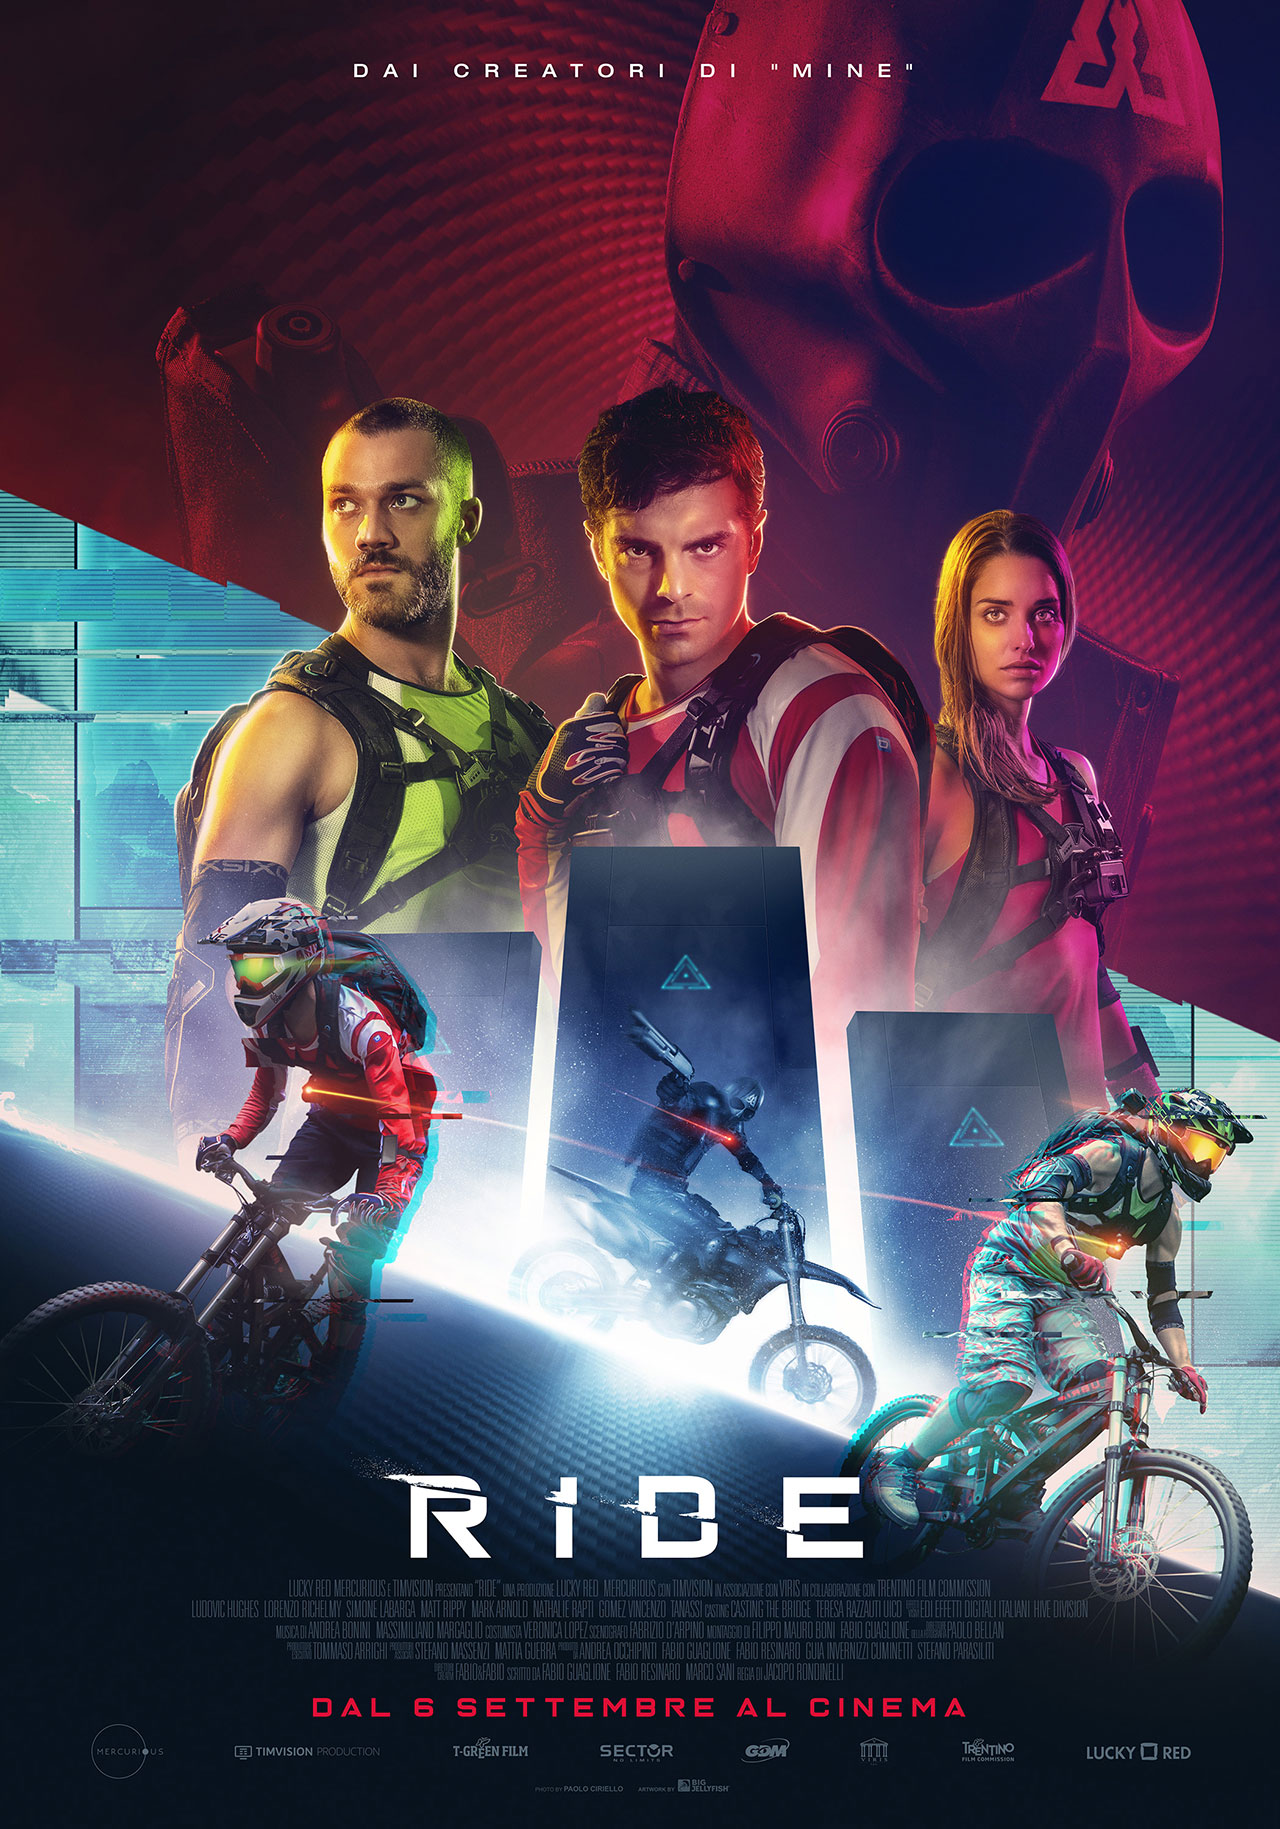 Ride, il poster ufficiale - MYmovies.it1280 x 1829